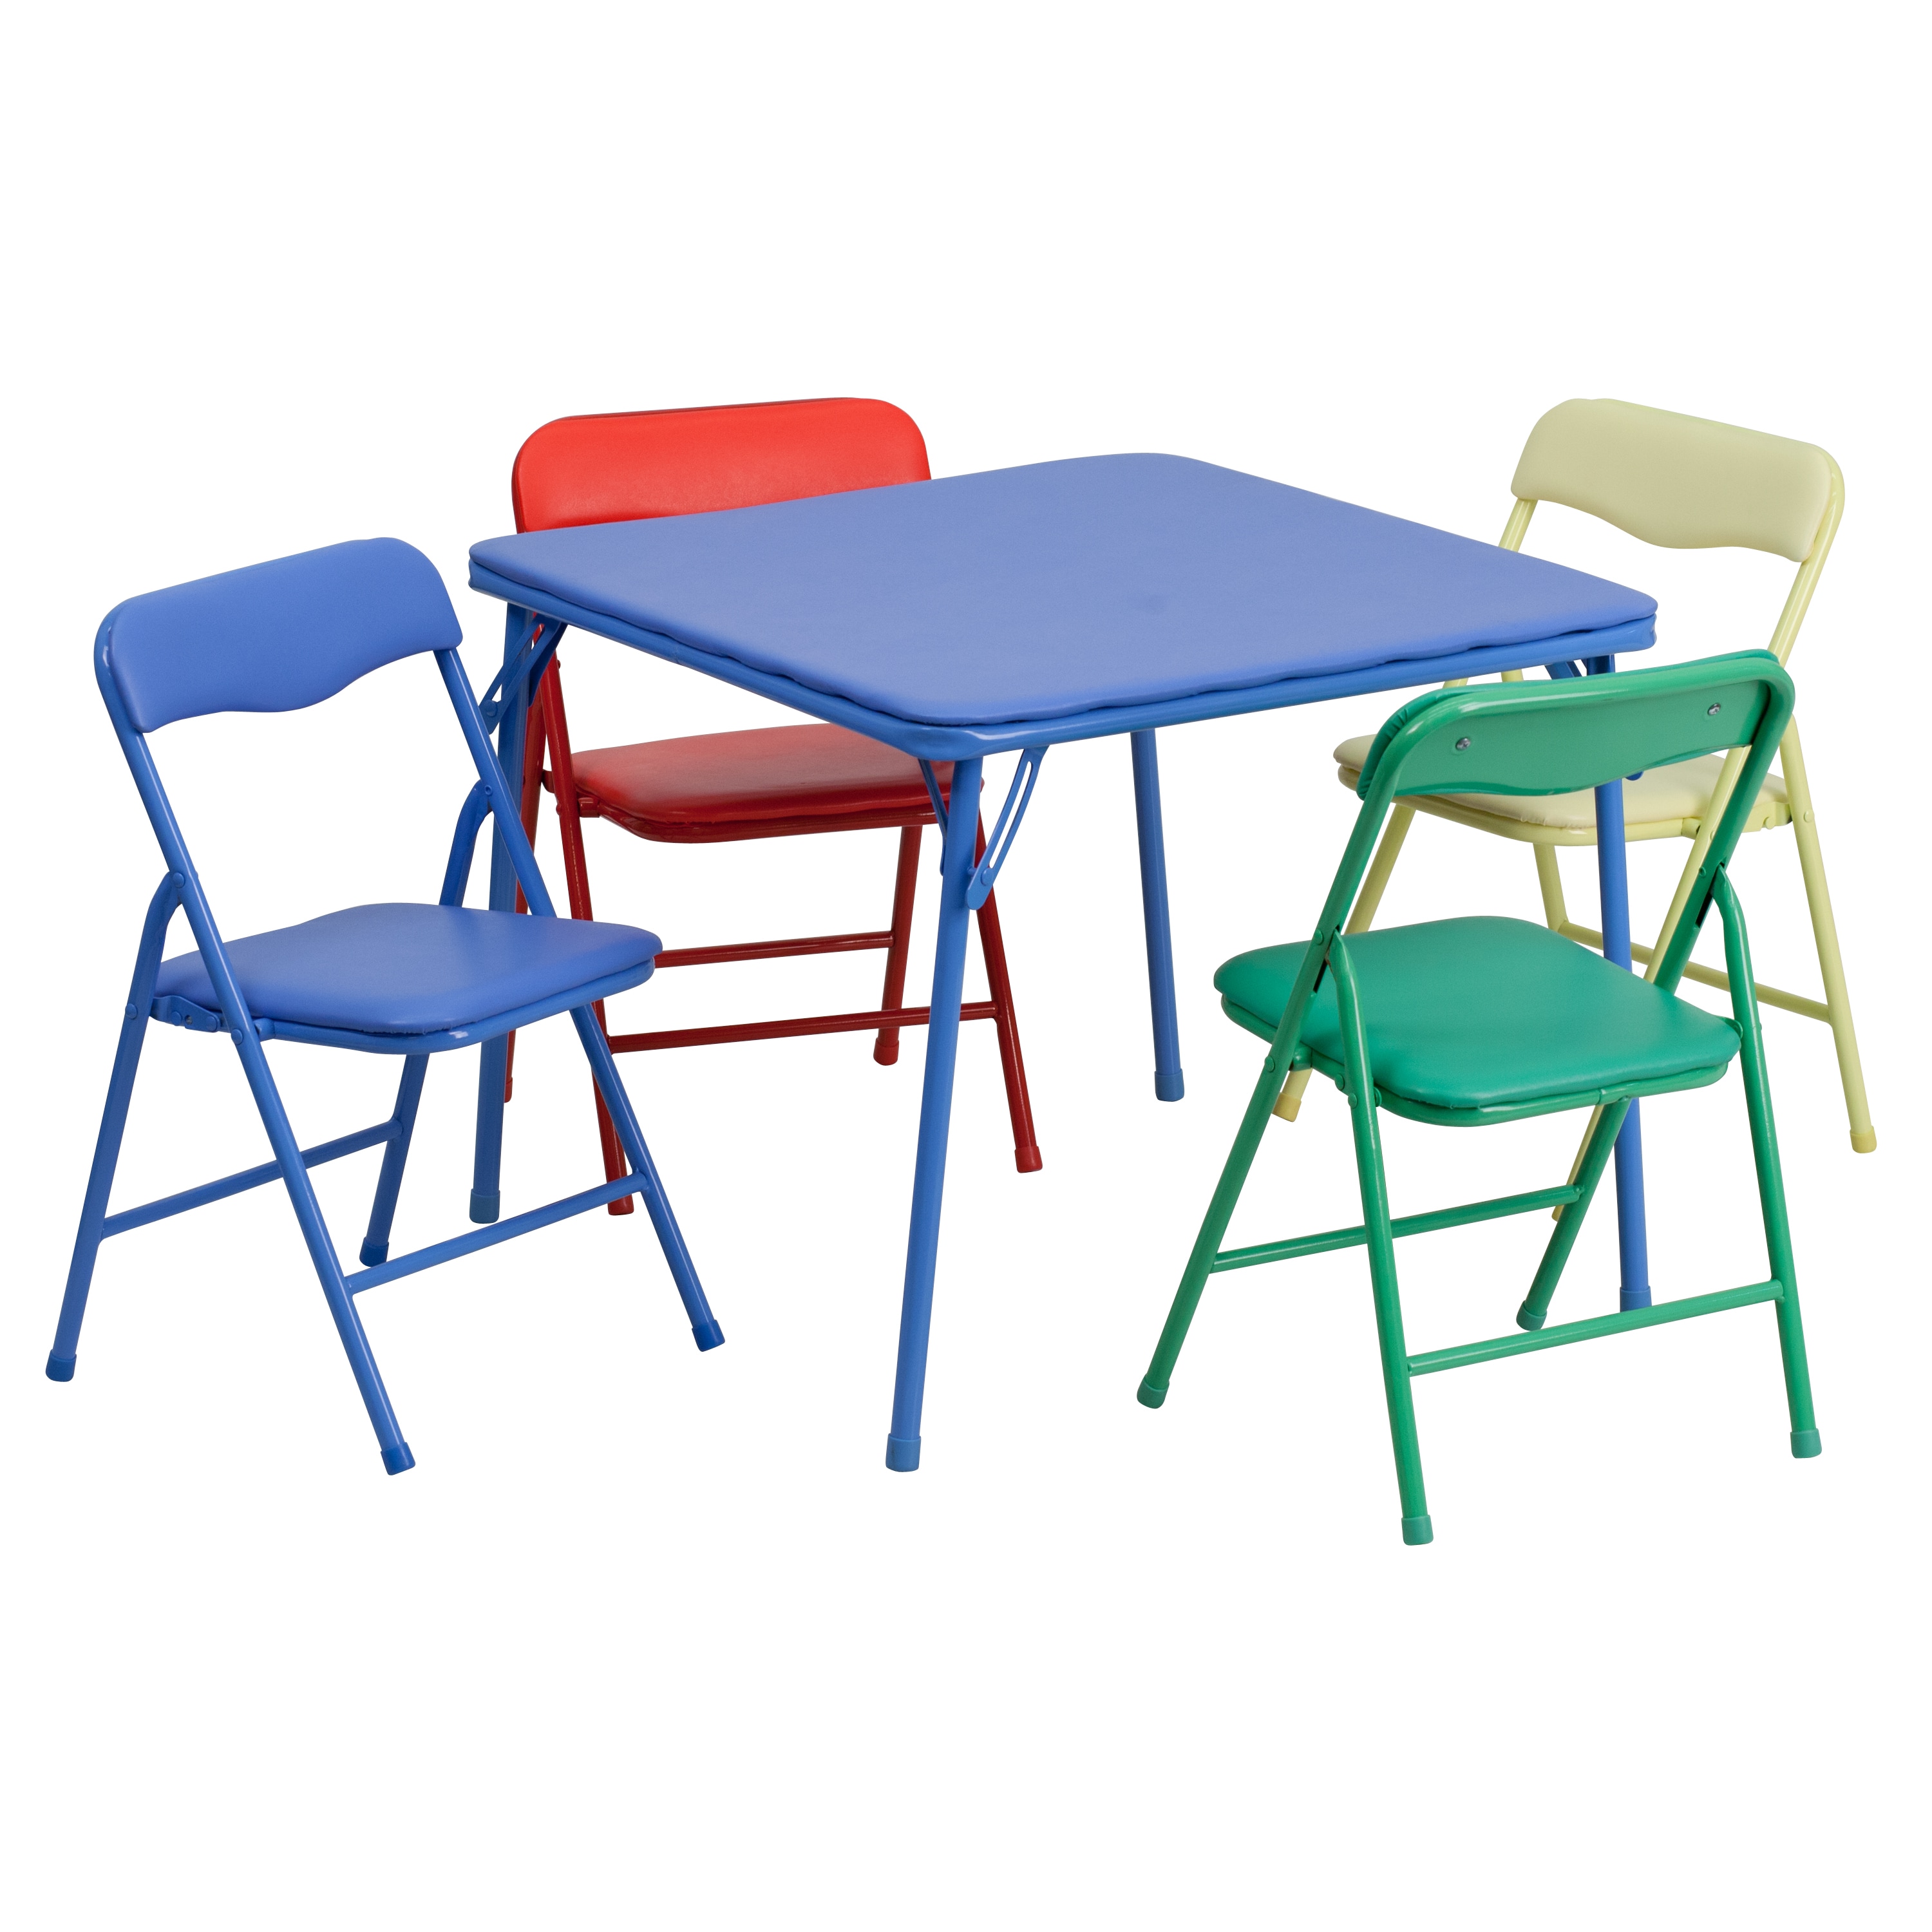 Flash Furniture Blue Square Kid's Play Table Set of 20 Chairs in ...